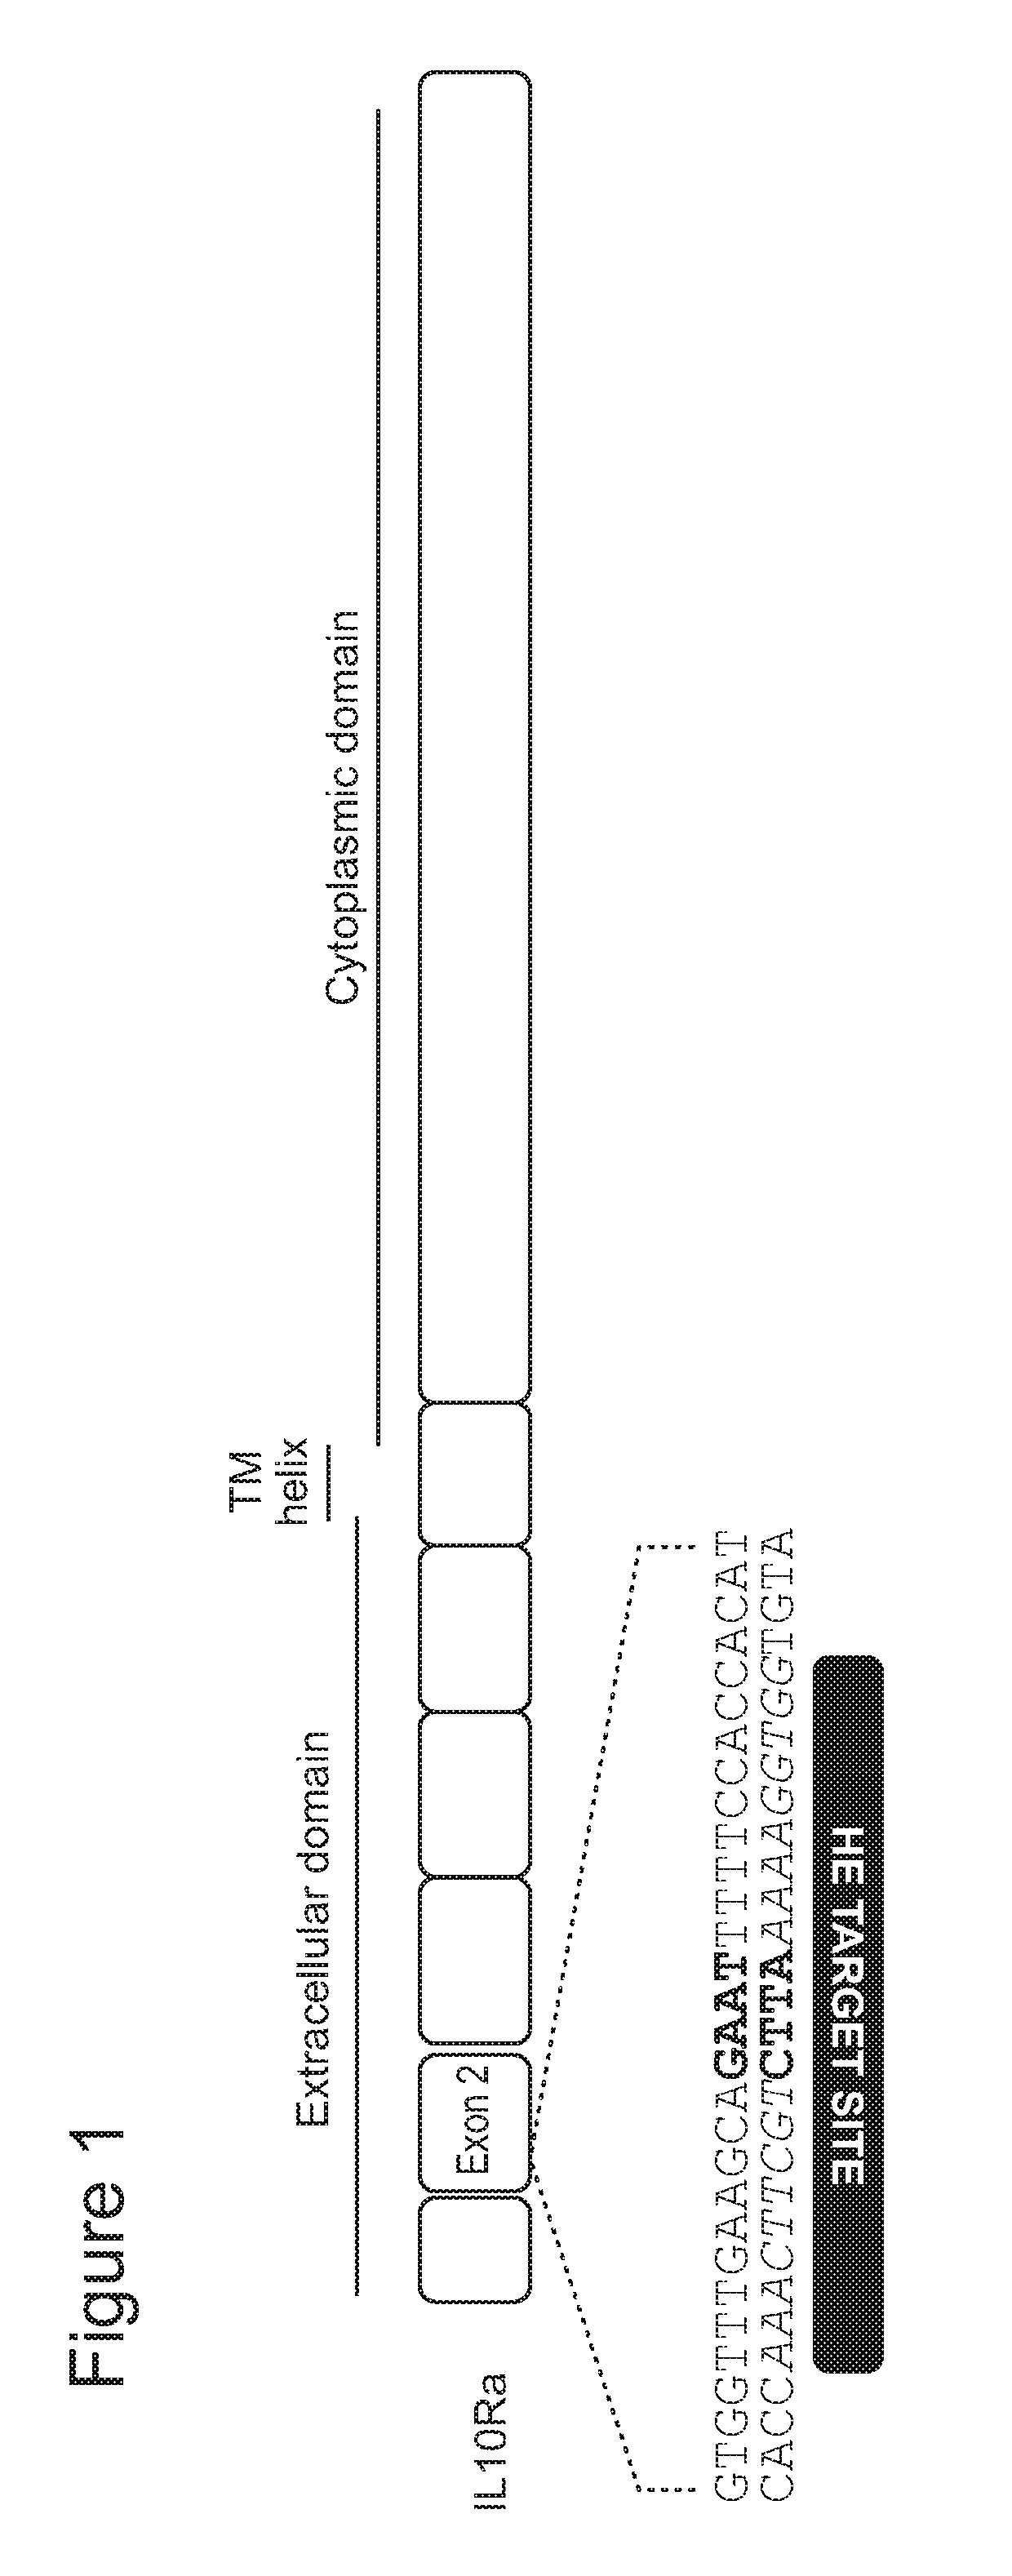 Il-10 receptor alpha homing endonuclease variants, compositions, and methods of use